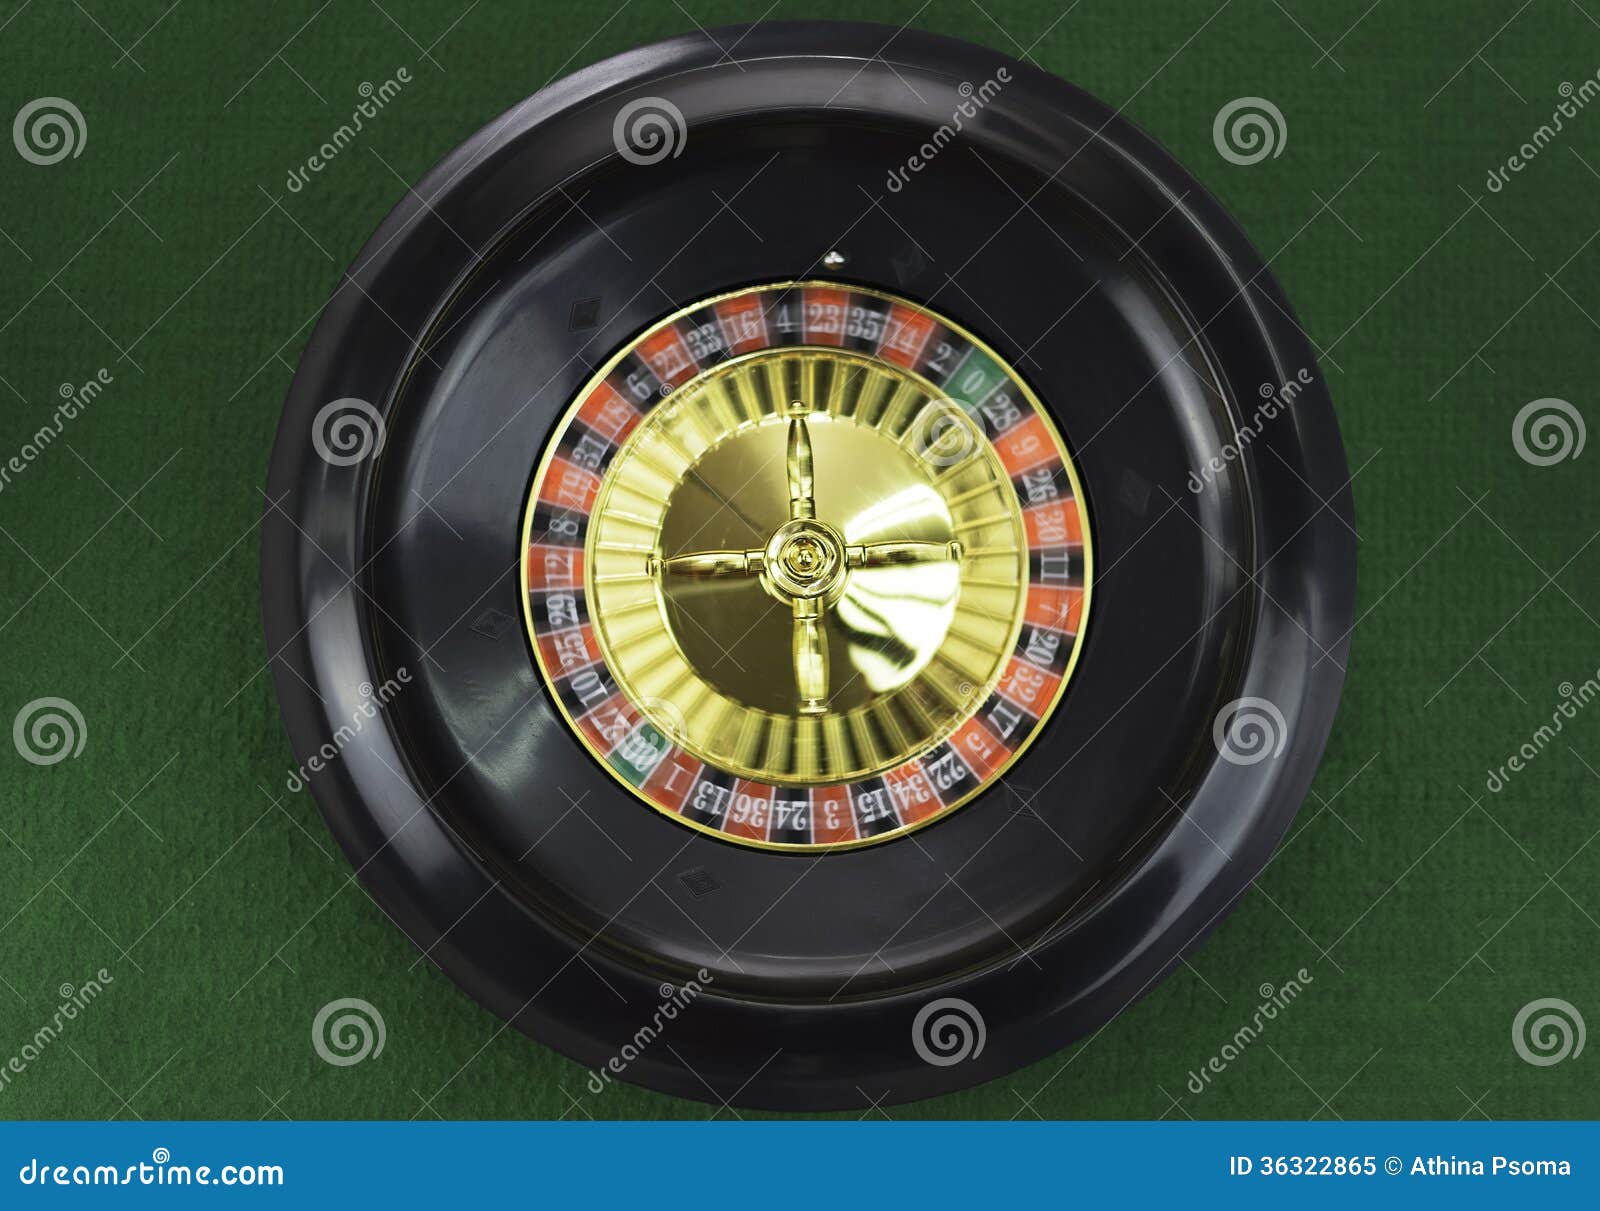 Spinning Roulette Wheel Royalty Free Stock Photo - Image: 363228651300 x 1001